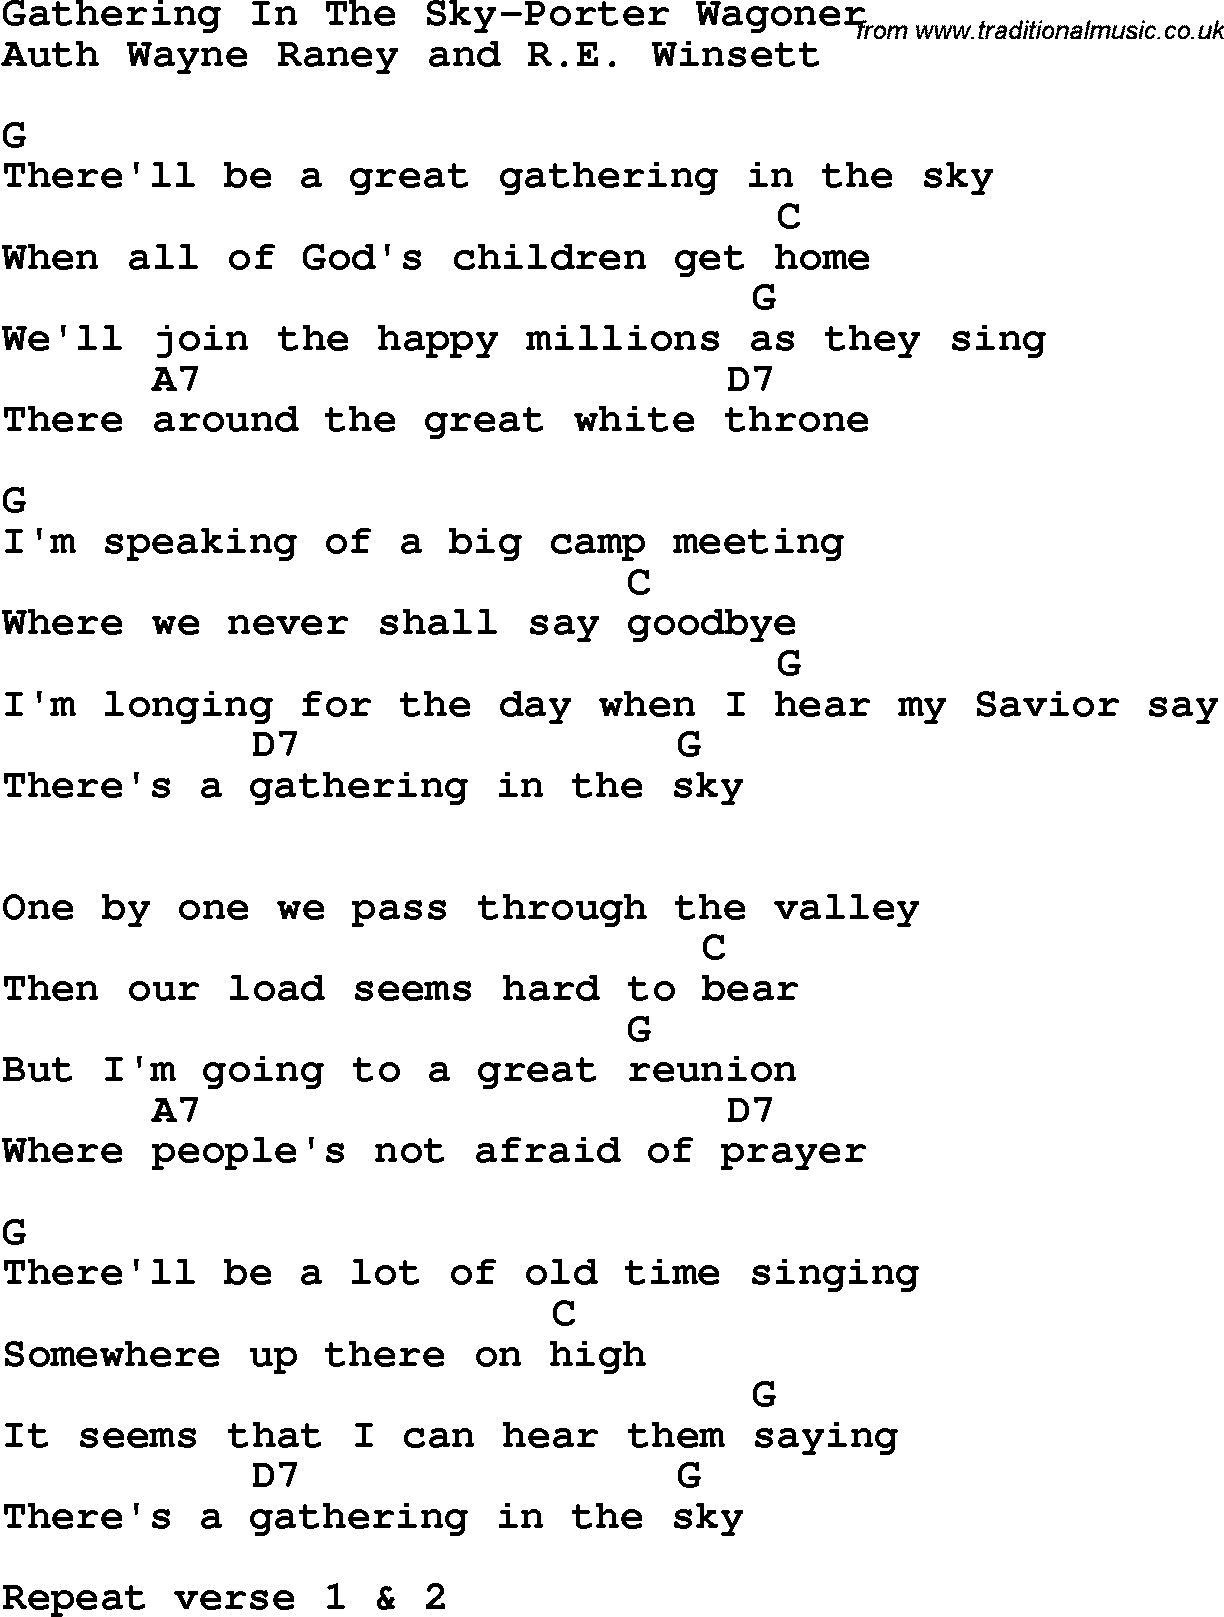 Country, Southern and Bluegrass Gospel Song Gathering In The Sky-Porter Wagoner lyrics and chords